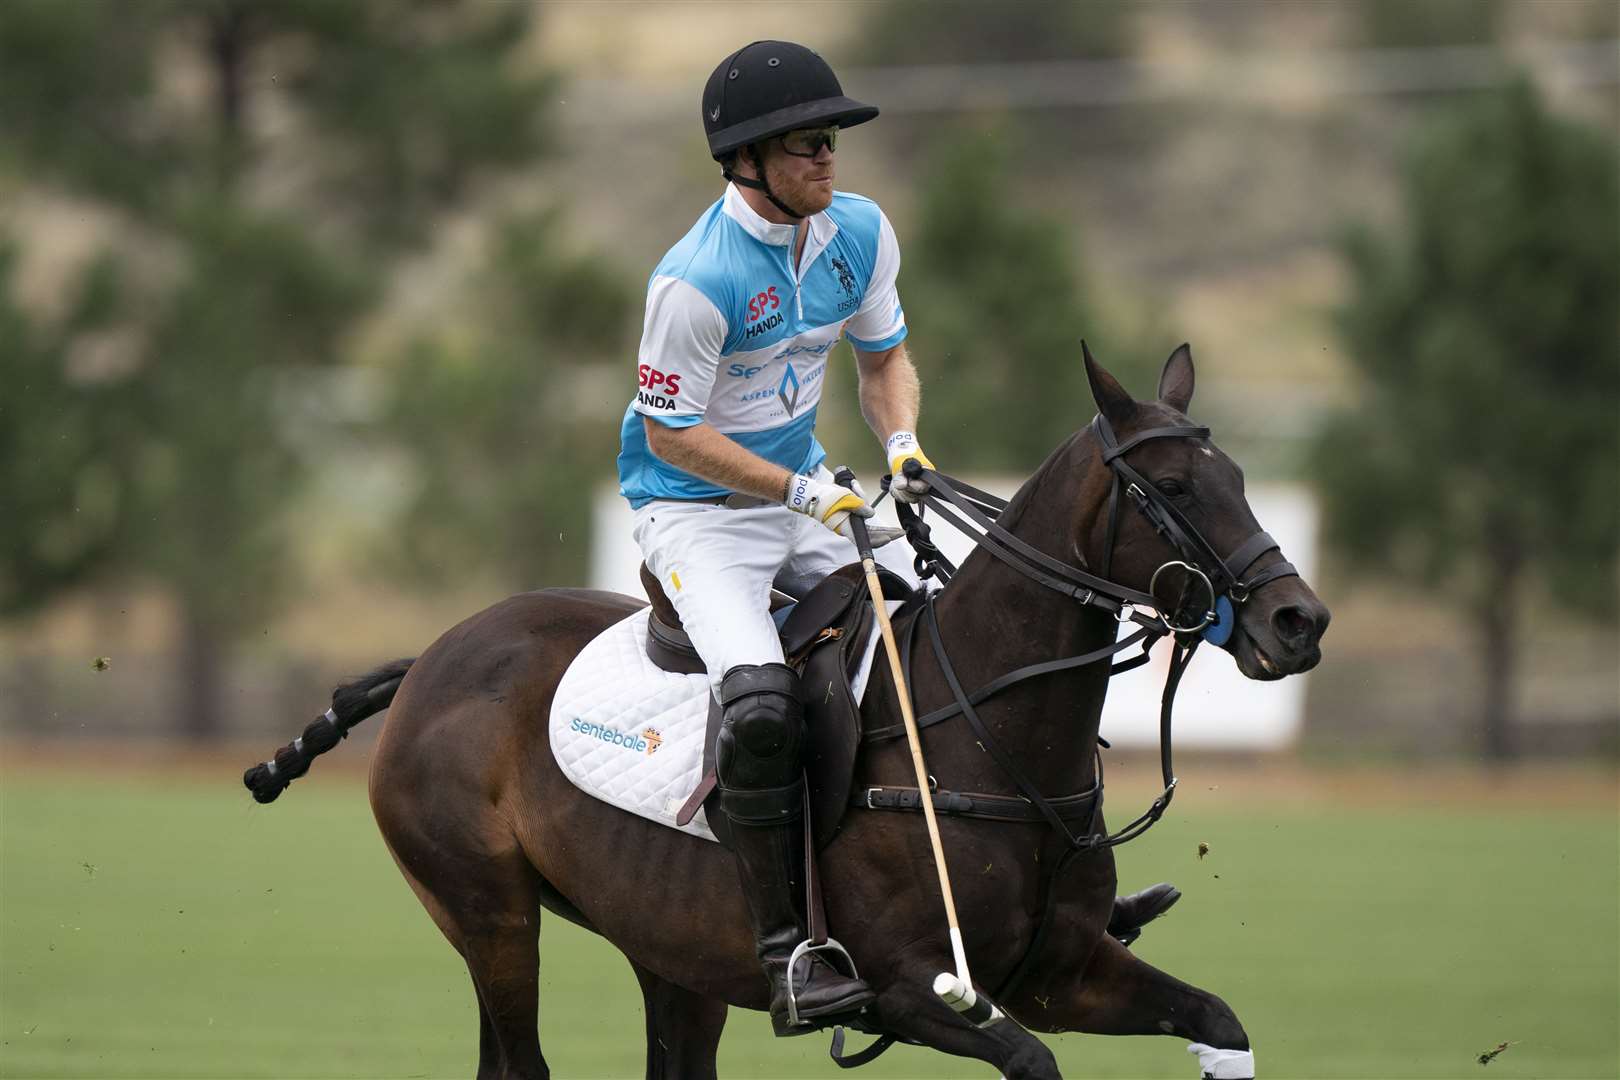 The Duke of Sussex plays in a polo match during the Sentebale ISPS Handa Polo Cup at the Aspen Valley Polo Club in Carbondale, Colorado (Kirsty O’Connor/PA)